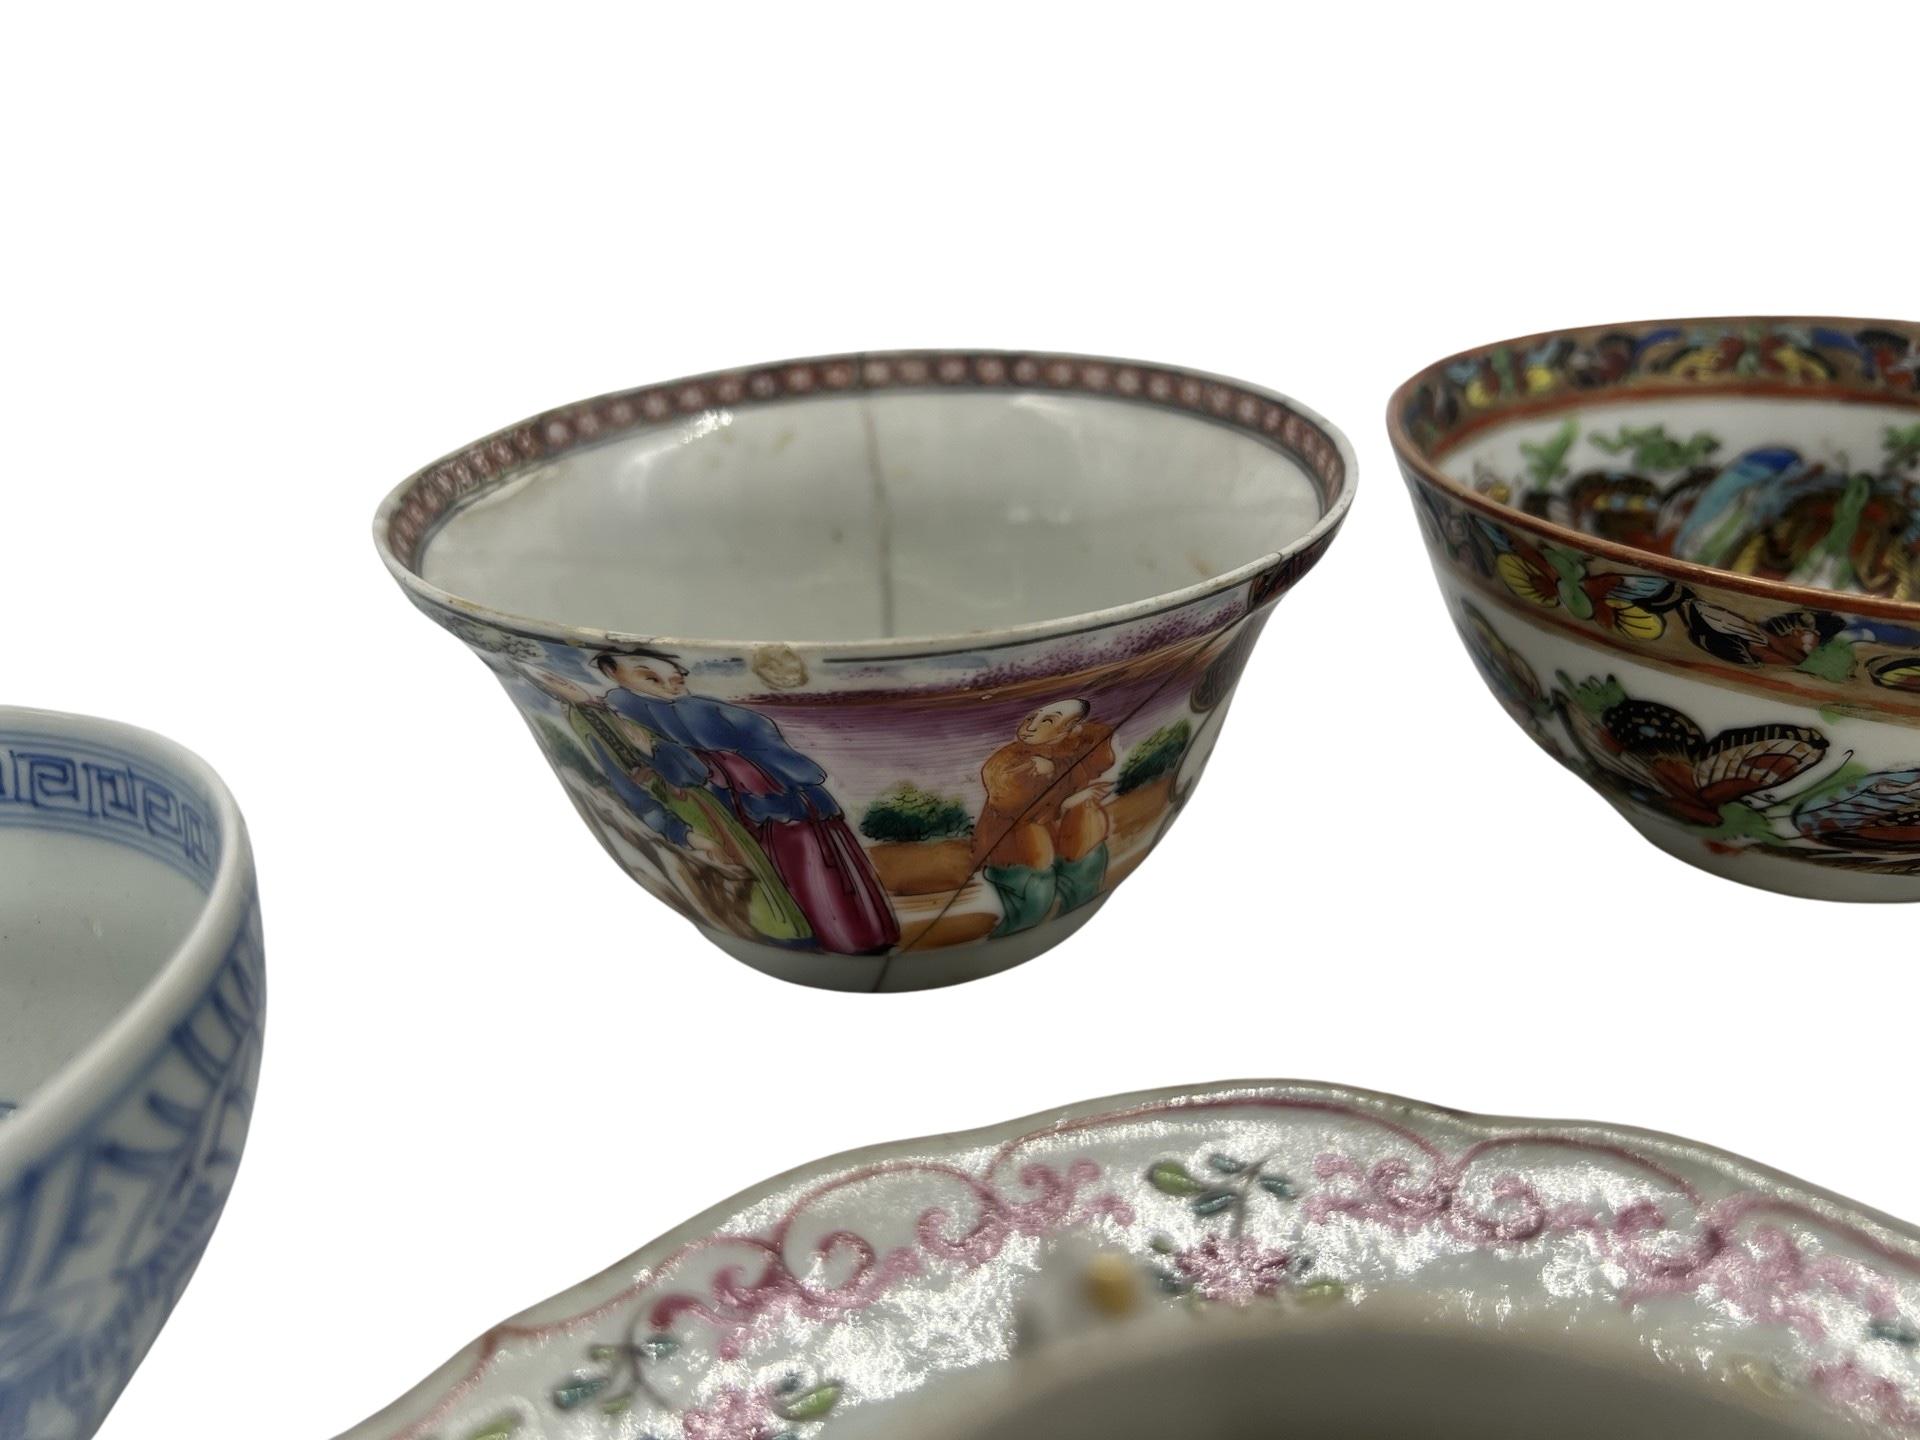 Chinese, mostly 18th century. 
<br>A grouping of 9 Chinese porcelain objects including a blue and white floral bowl, a Famille rose bowl heavily enamel decorated with figural scenes, a 